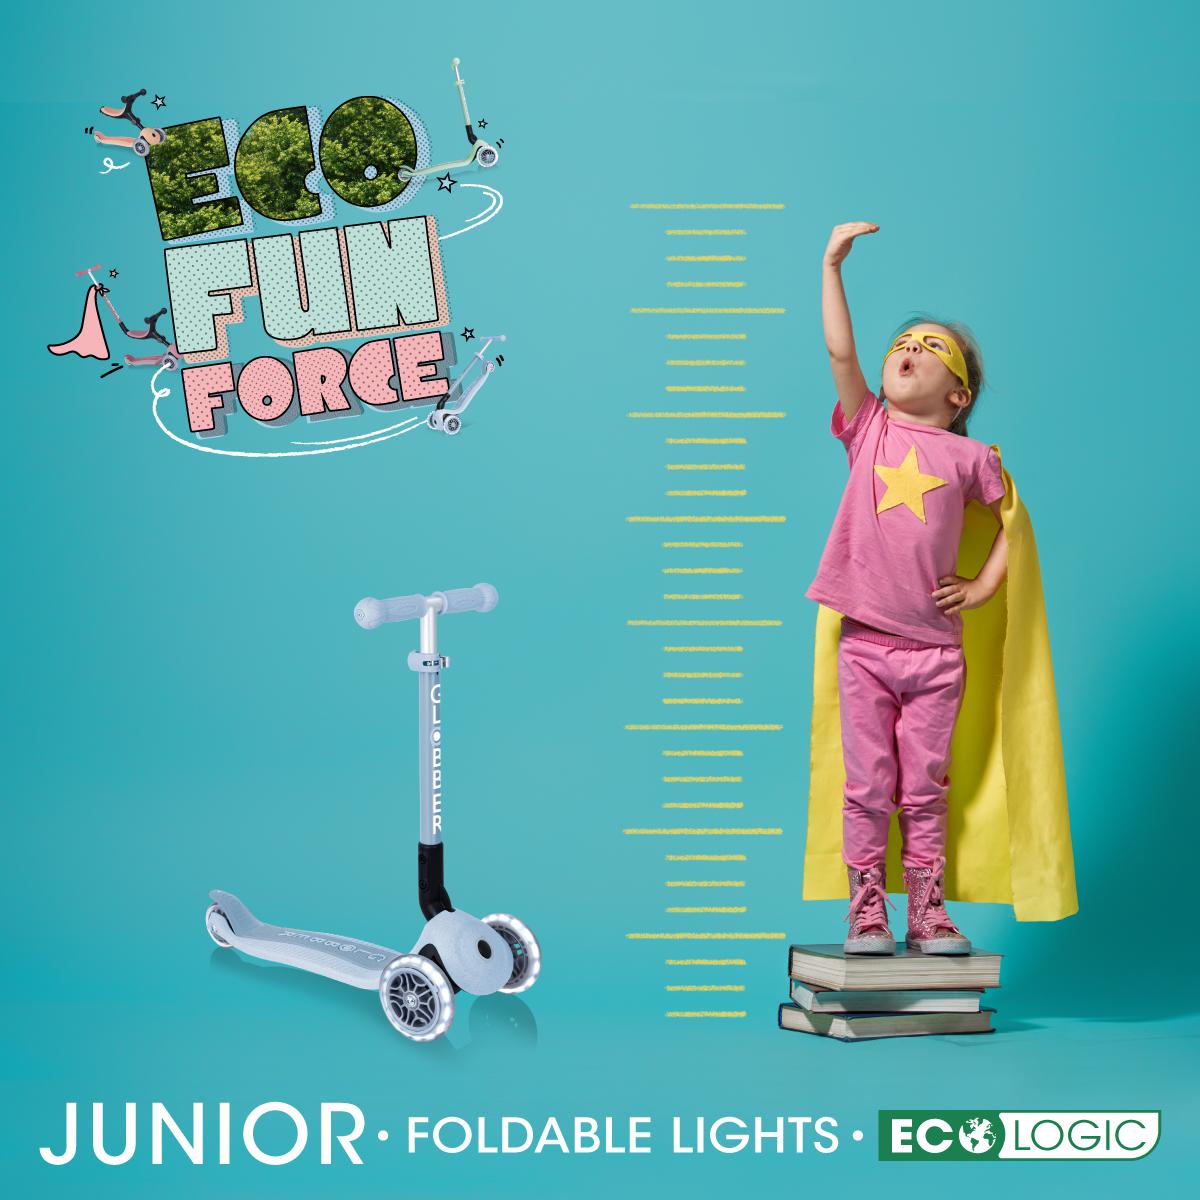 JUNIOR FOLDABLE LIGHTS ECOLOGIC 3-wheel eco-friendly scooter